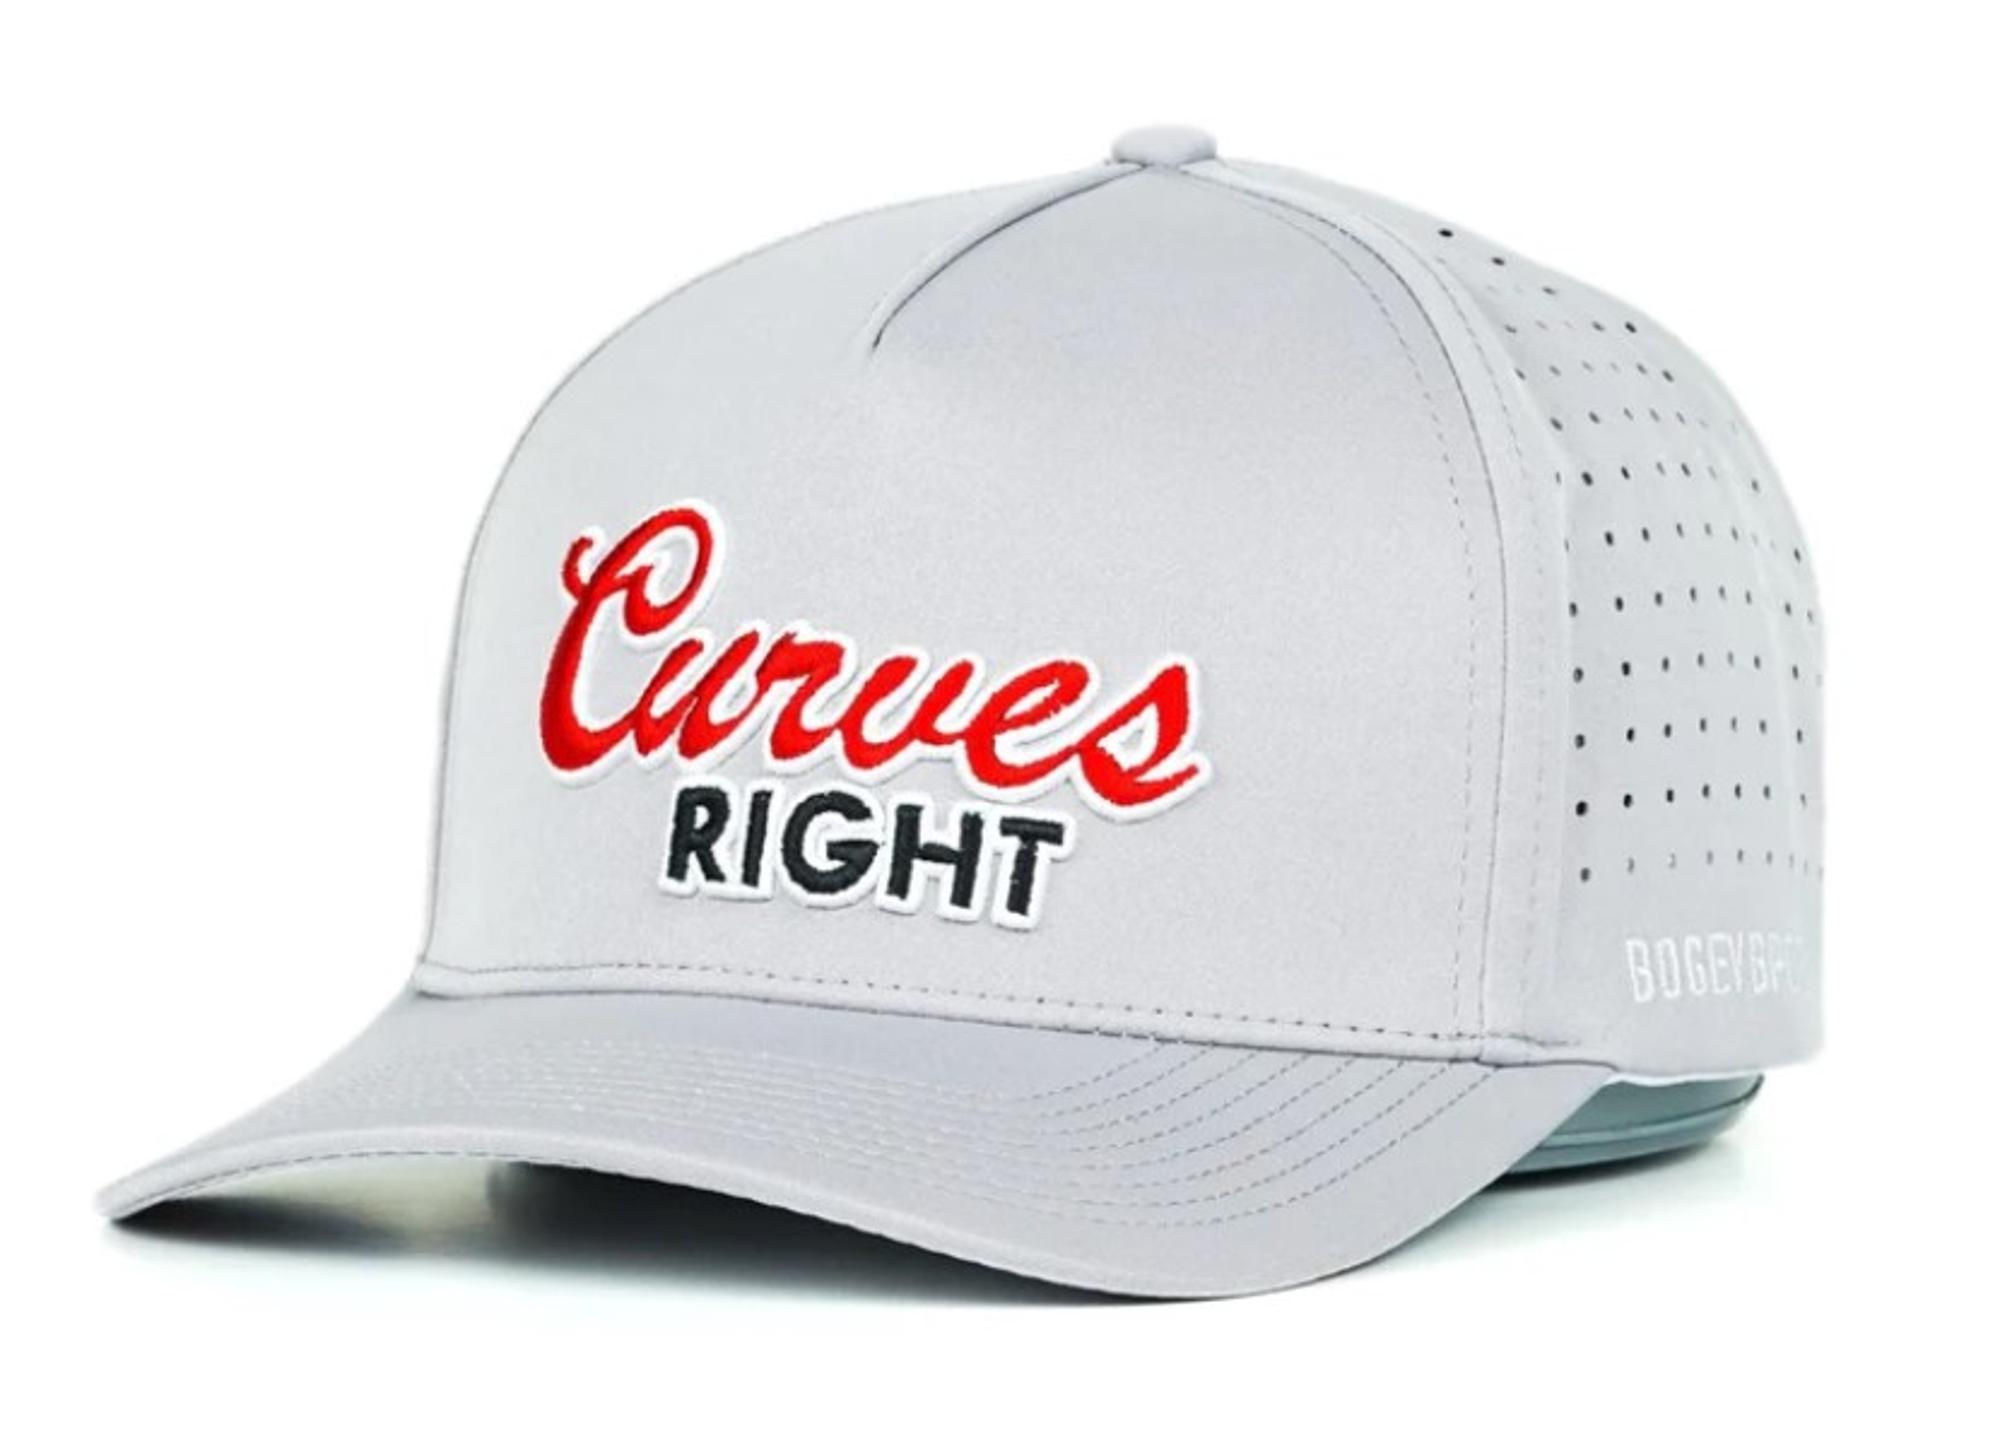 Curves Right Performance Golf Hat